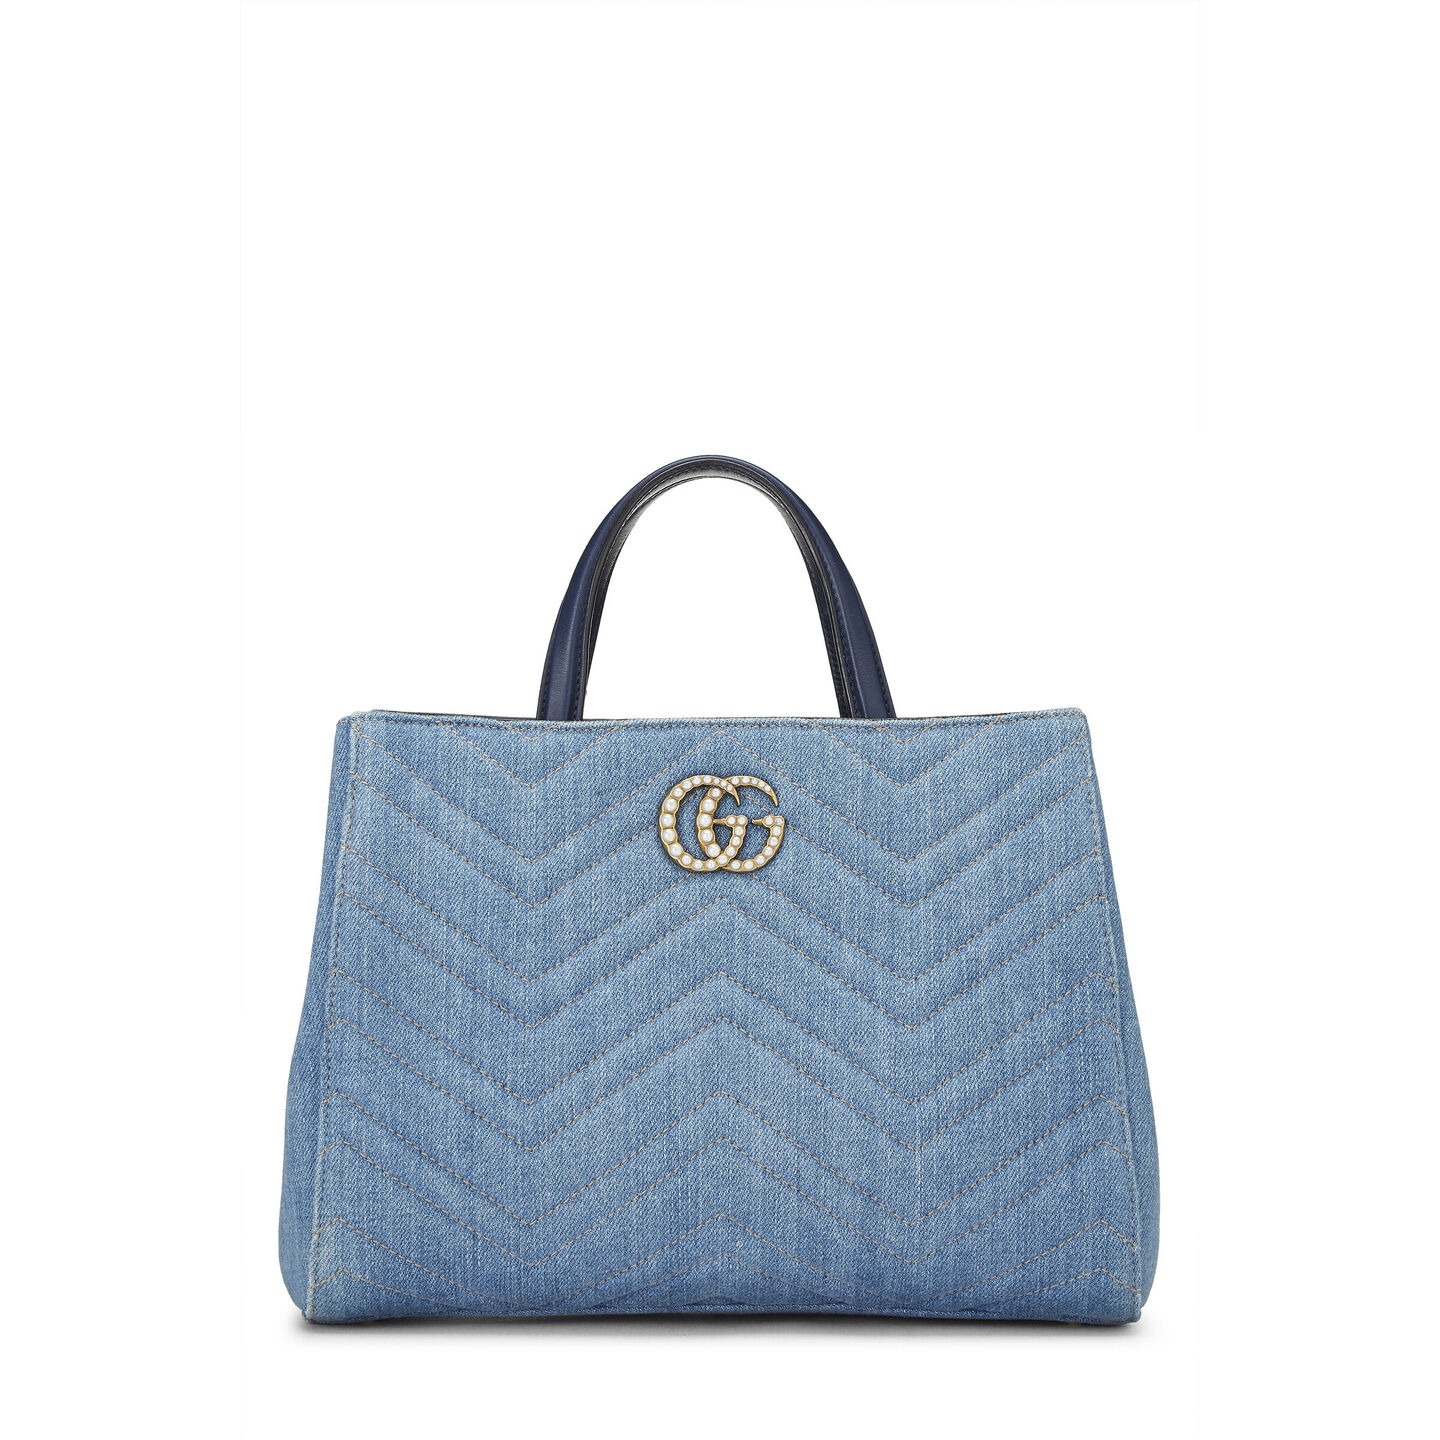 GUCCI BLUE DENIM GG MARMONT TOP HANDLE BAG SMALL